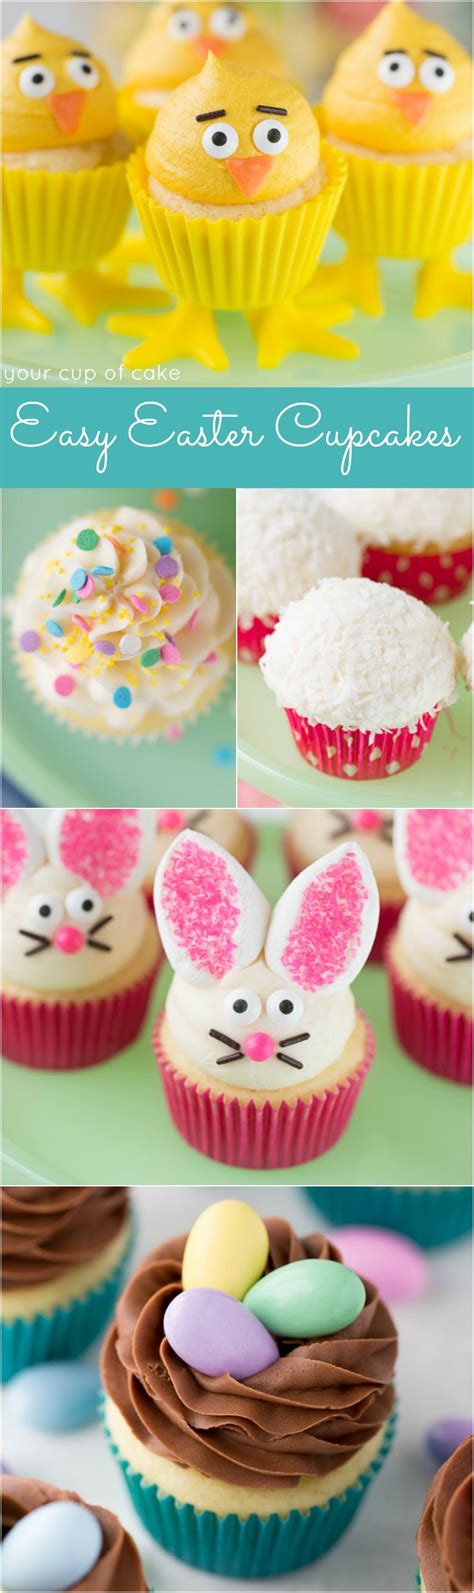 Cake decorating is so much fun if you have the right tools, and you end up with a realistic looking dessert. Easy Easter Cupcake Decorating (and Decor!) - Your Cup of Cake